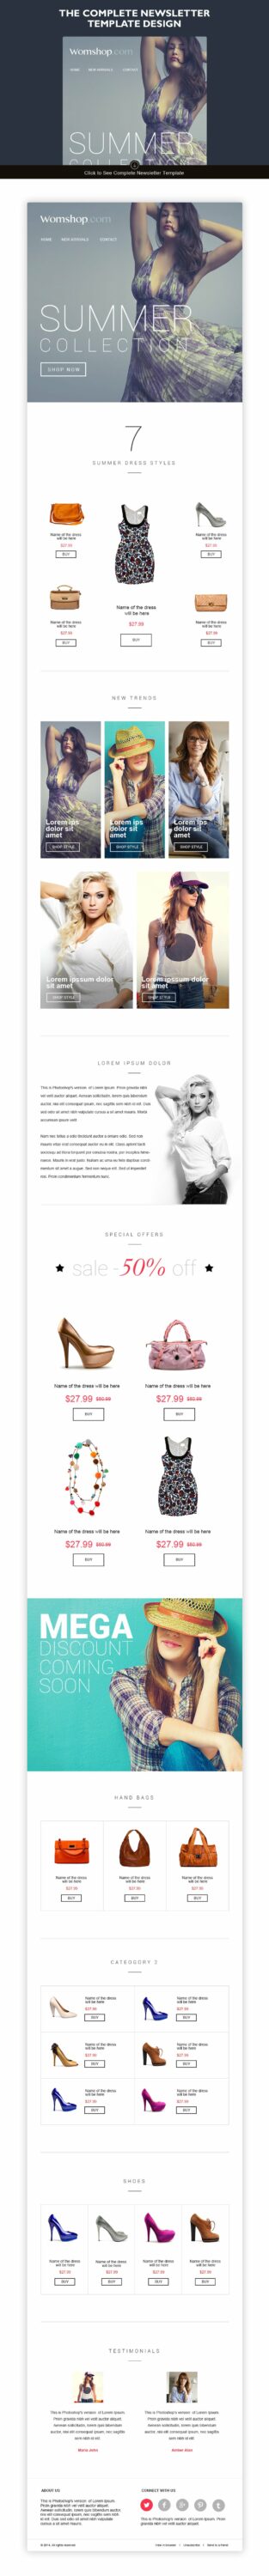 Image of colorful women's store email design template.